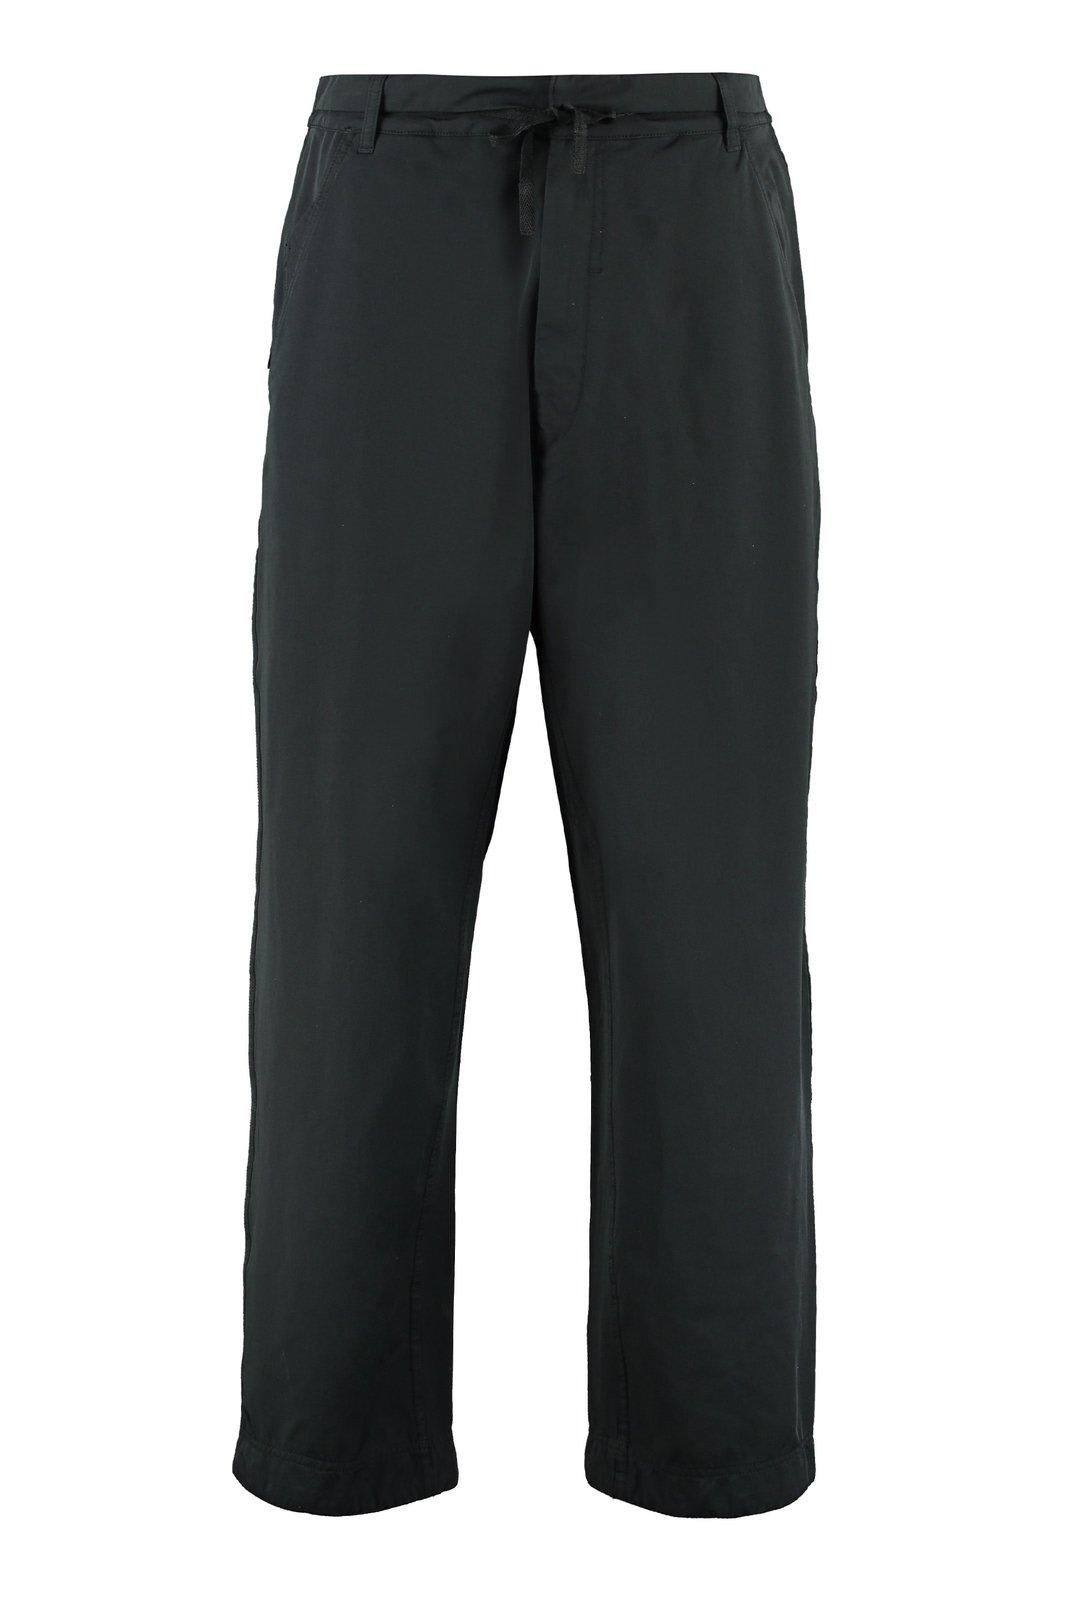 STONE ISLAND SHADOW PROJECT WIDE-LEG TAILORED trousers